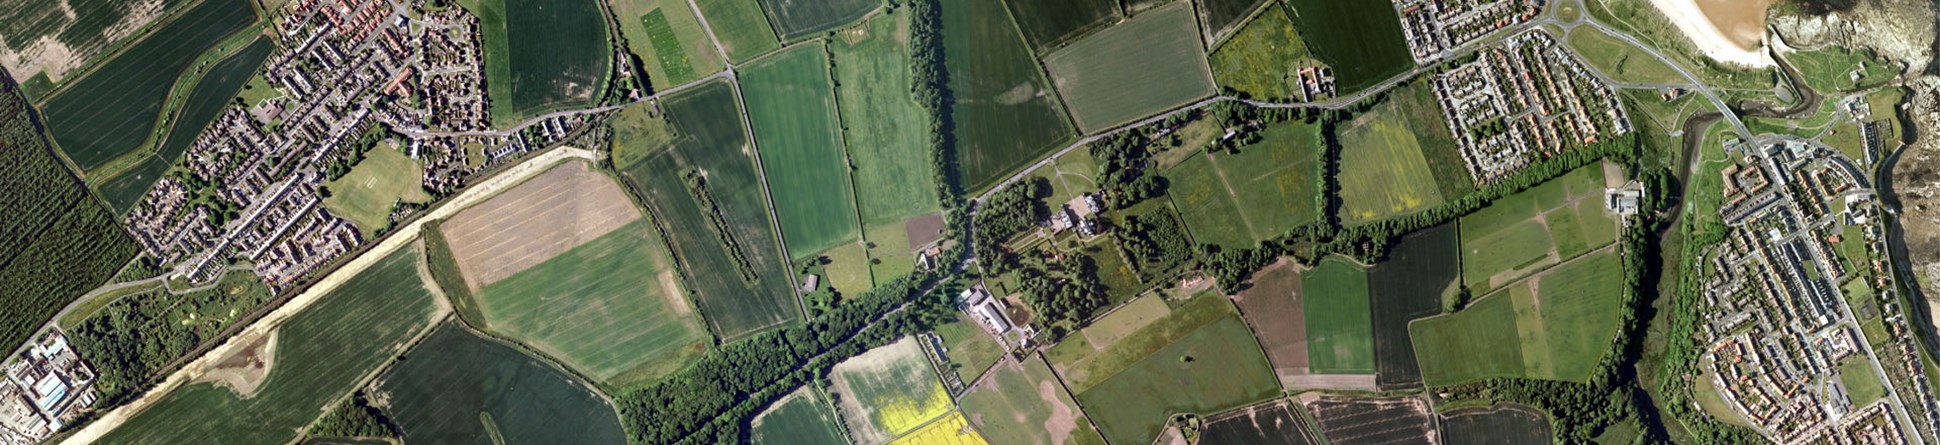 Colour aerial photo of a transect through a landscape with modern housing developments bordering arable fields with some trees